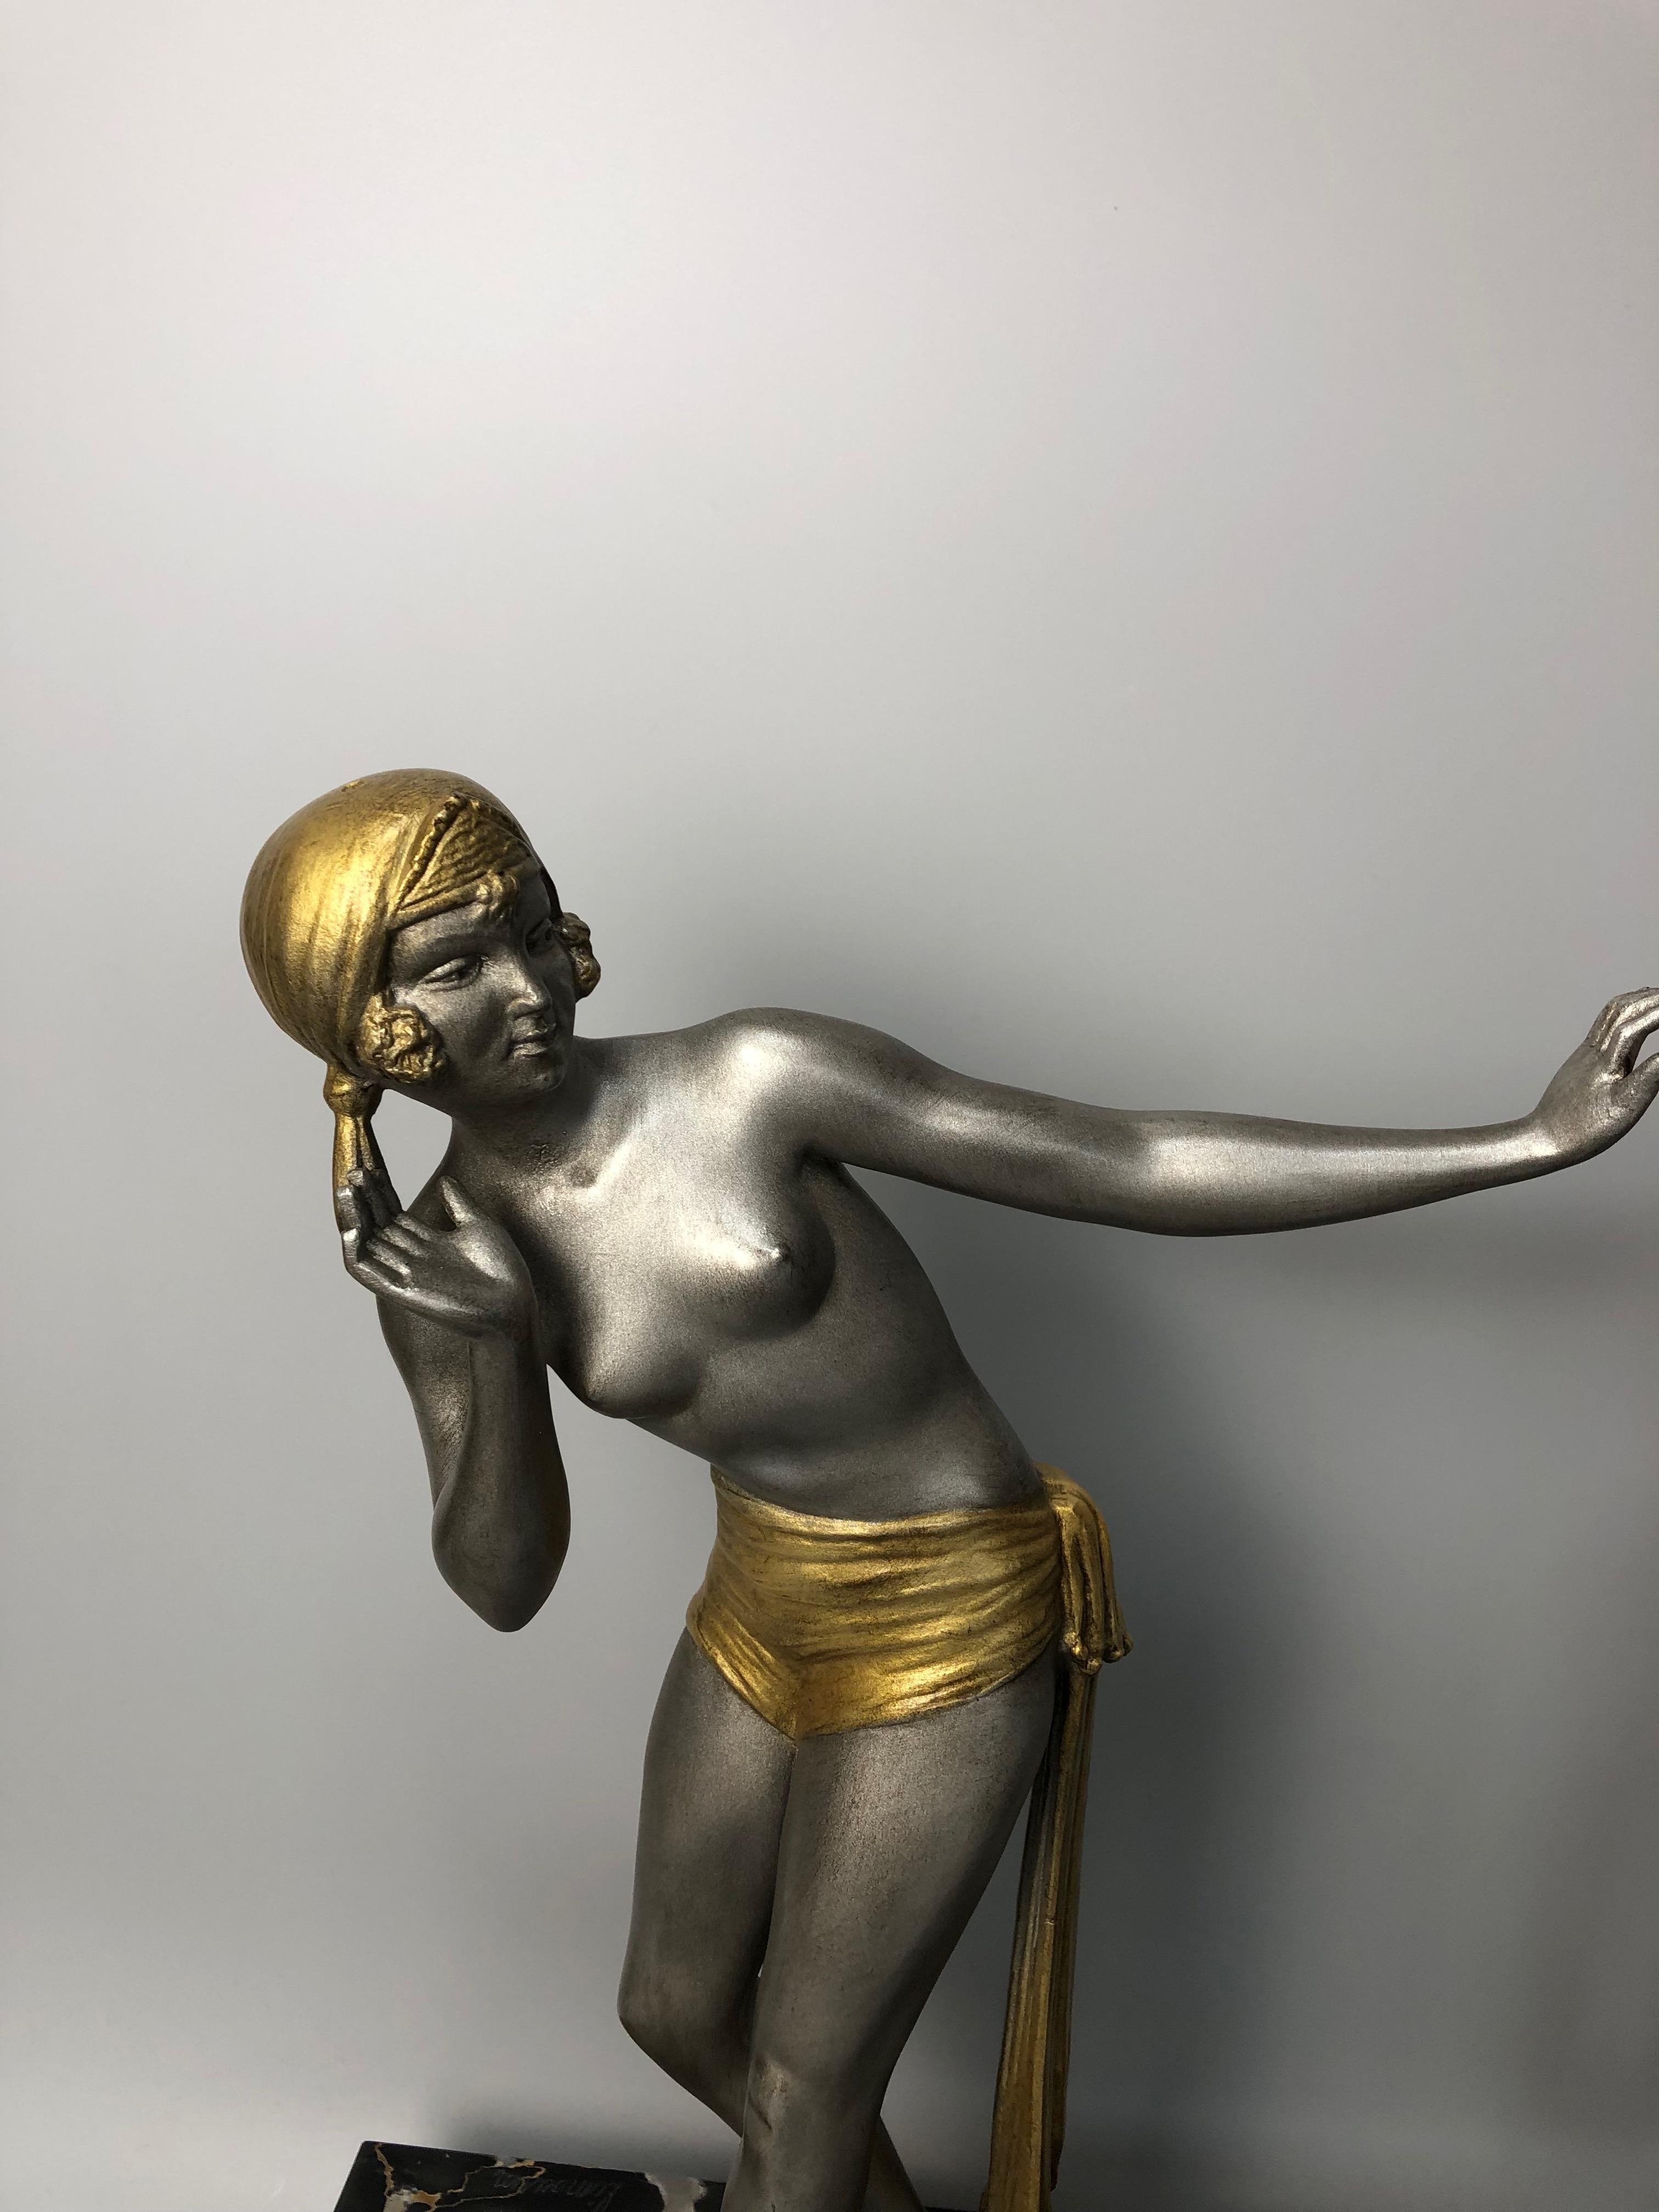 Art deco sculpture circa 1930.
Regulates silver and gold cold patina.
All on a portor marble base.
Small restoration on a cymbal.
Signed on Limousin marble.
Total height: 39 cm
Length: 47.5cm
Width: 13.5cm
Weight: 9 Kg